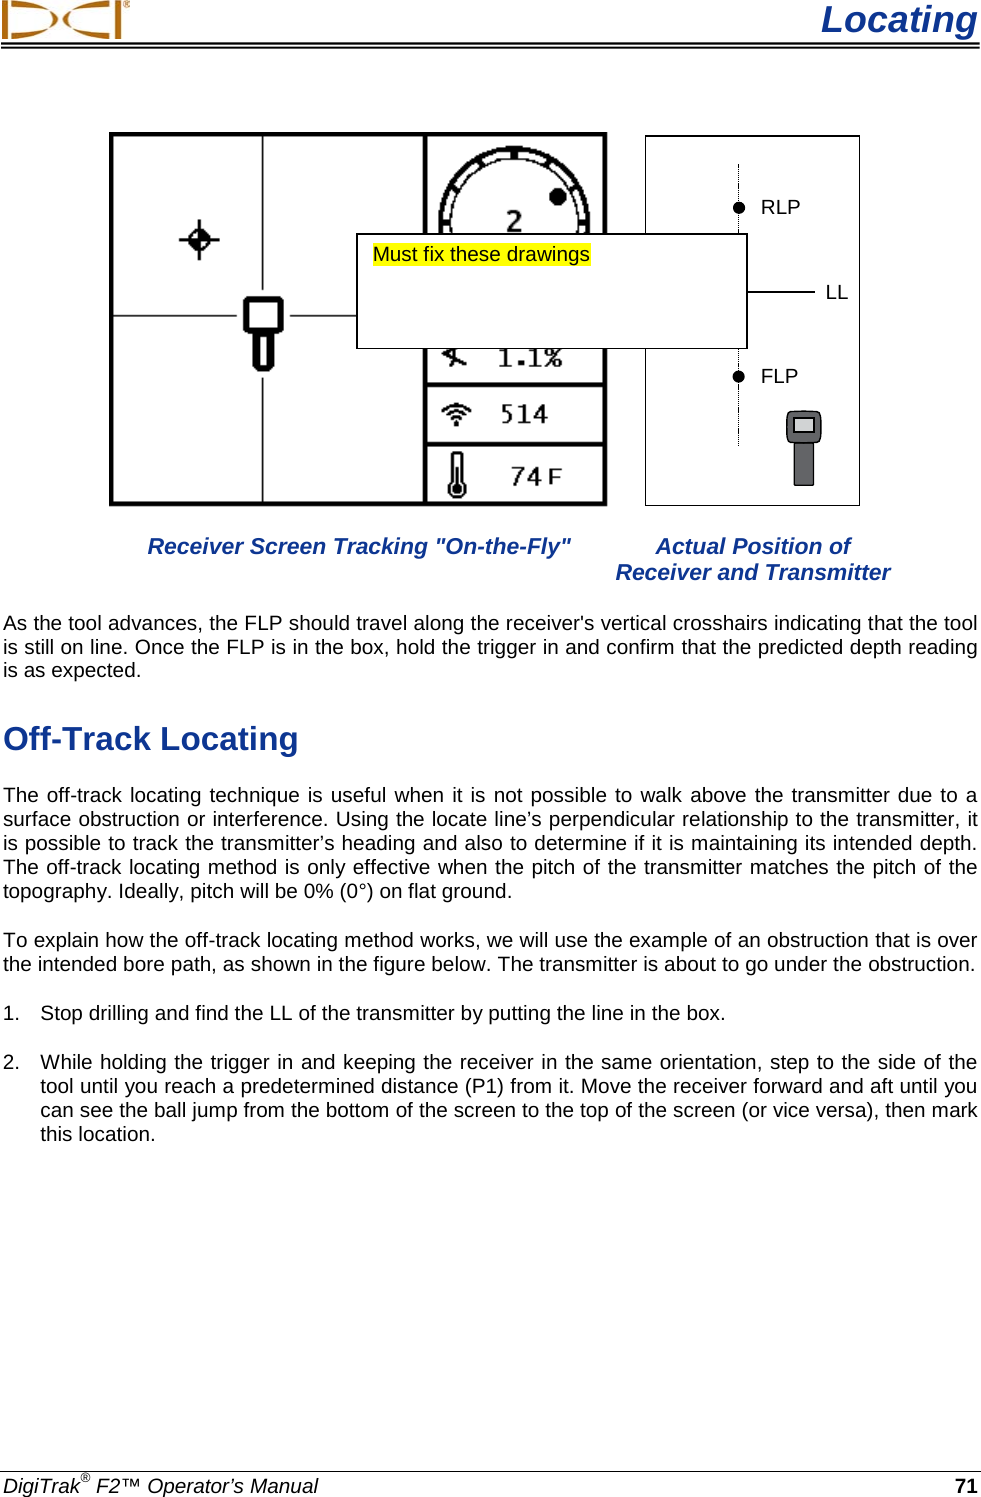  Locating DigiTrak® F2™ Operator’s Manual 71    RLPFLPLL  Receiver Screen Tracking &quot;On-the-Fly&quot;  Actual Position of        Receiver and Transmitter As the tool advances, the FLP should travel along the receiver&apos;s vertical crosshairs indicating that the tool is still on line. Once the FLP is in the box, hold the trigger in and confirm that the predicted depth reading is as expected. Off-Track Locating The off-track locating technique is useful when it is not possible to walk above the transmitter due to a surface obstruction or interference. Using the locate line’s perpendicular relationship to the transmitter, it is possible to track the transmitter’s heading and also to determine if it is maintaining its intended depth. The off-track locating method is only effective when the pitch of the transmitter matches the pitch of the topography. Ideally, pitch will be 0% (0°) on flat ground. To explain how the off-track locating method works, we will use the example of an obstruction that is over the intended bore path, as shown in the figure below. The transmitter is about to go under the obstruction. 1. Stop drilling and find the LL of the transmitter by putting the line in the box. 2. While holding the trigger in and keeping the receiver in the same orientation, step to the side of the tool until you reach a predetermined distance (P1) from it. Move the receiver forward and aft until you can see the ball jump from the bottom of the screen to the top of the screen (or vice versa), then mark this location. Must fix these drawings  